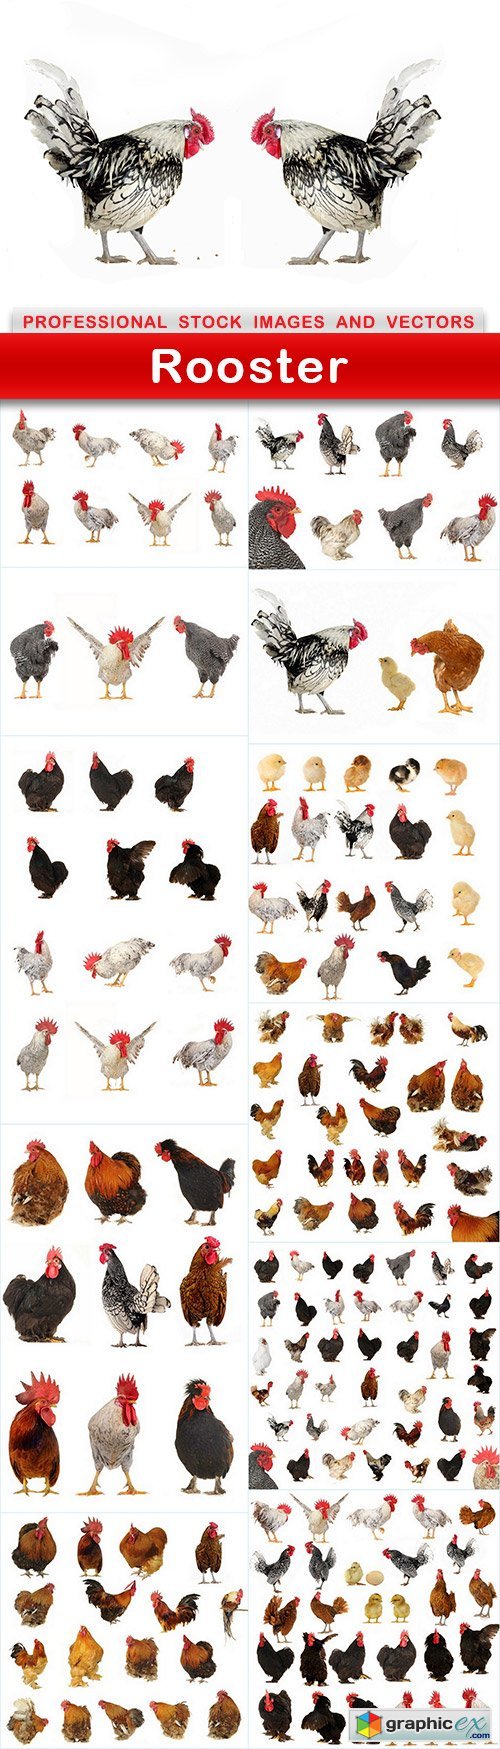 Rooster - 12 UHQ JPEG